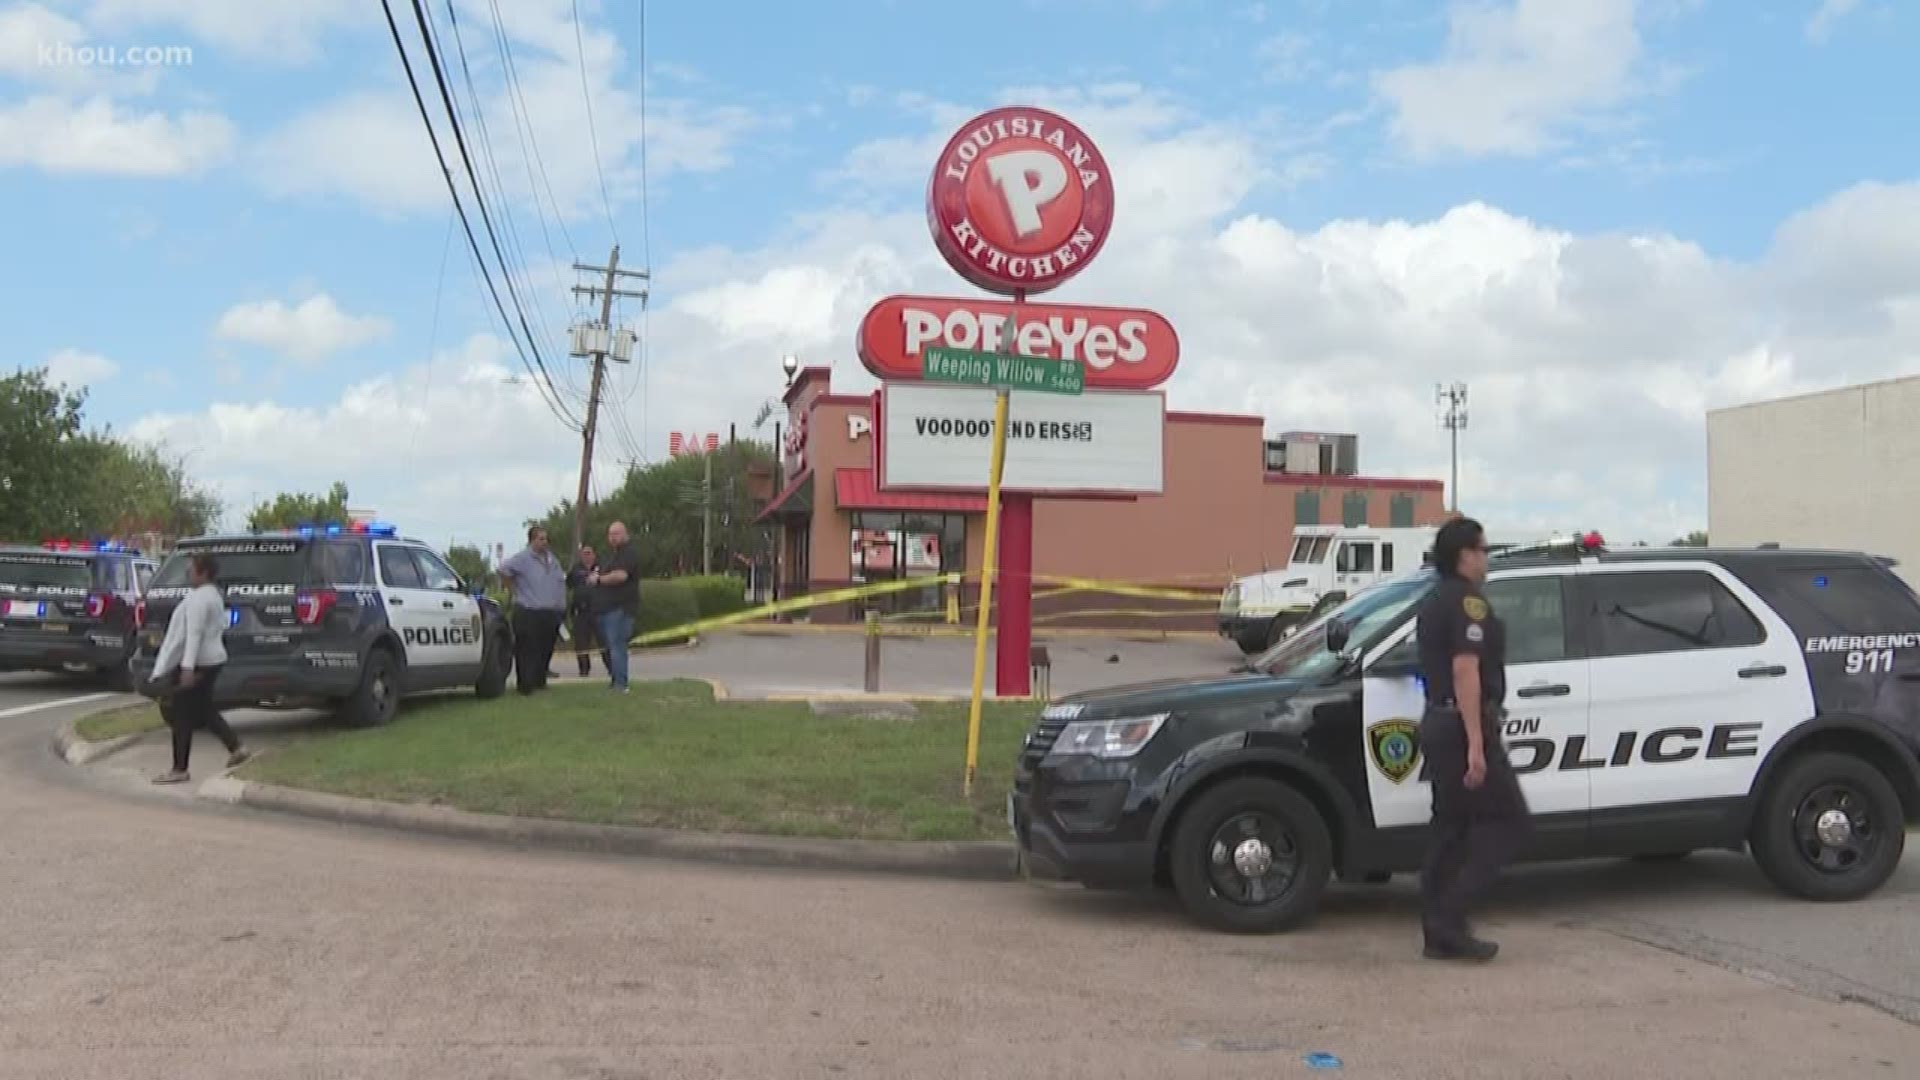 An armored truck security officer was killed after being shot in the face Thursday during an ambush at northwest Houston fast-food restaurant.